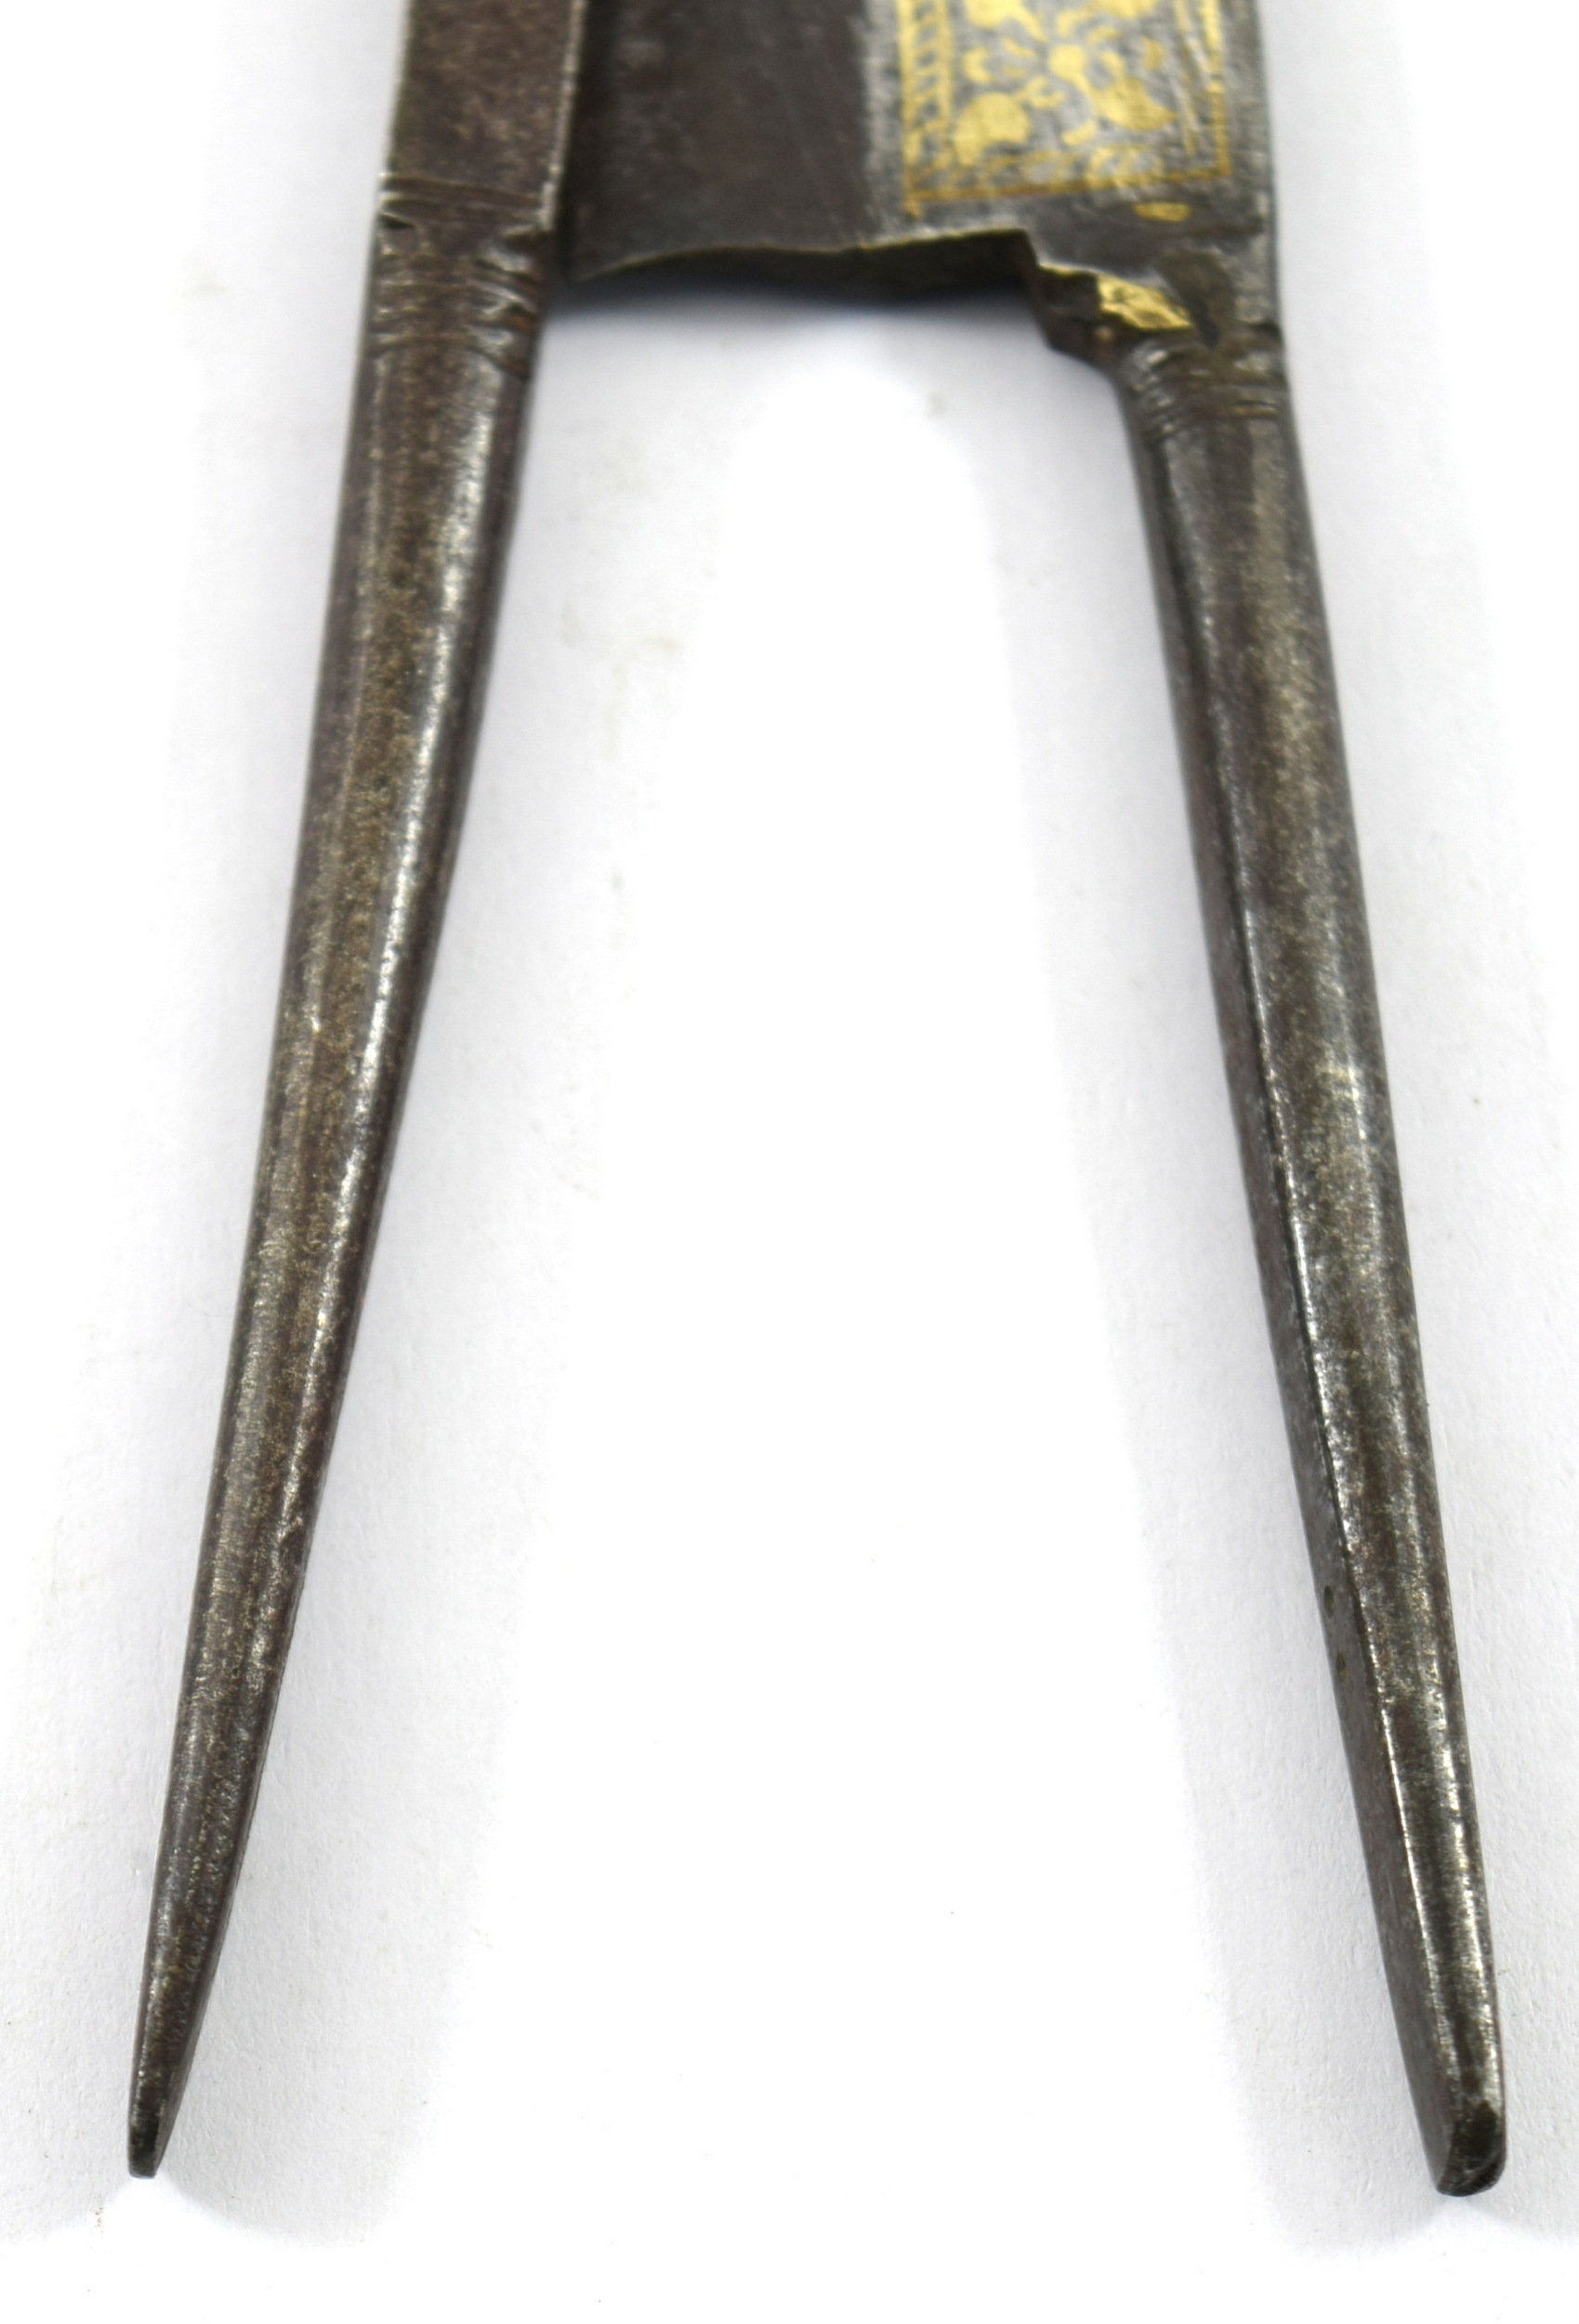 Indian steel and silver inlay Betel nut cutters one signed (item #1377657)